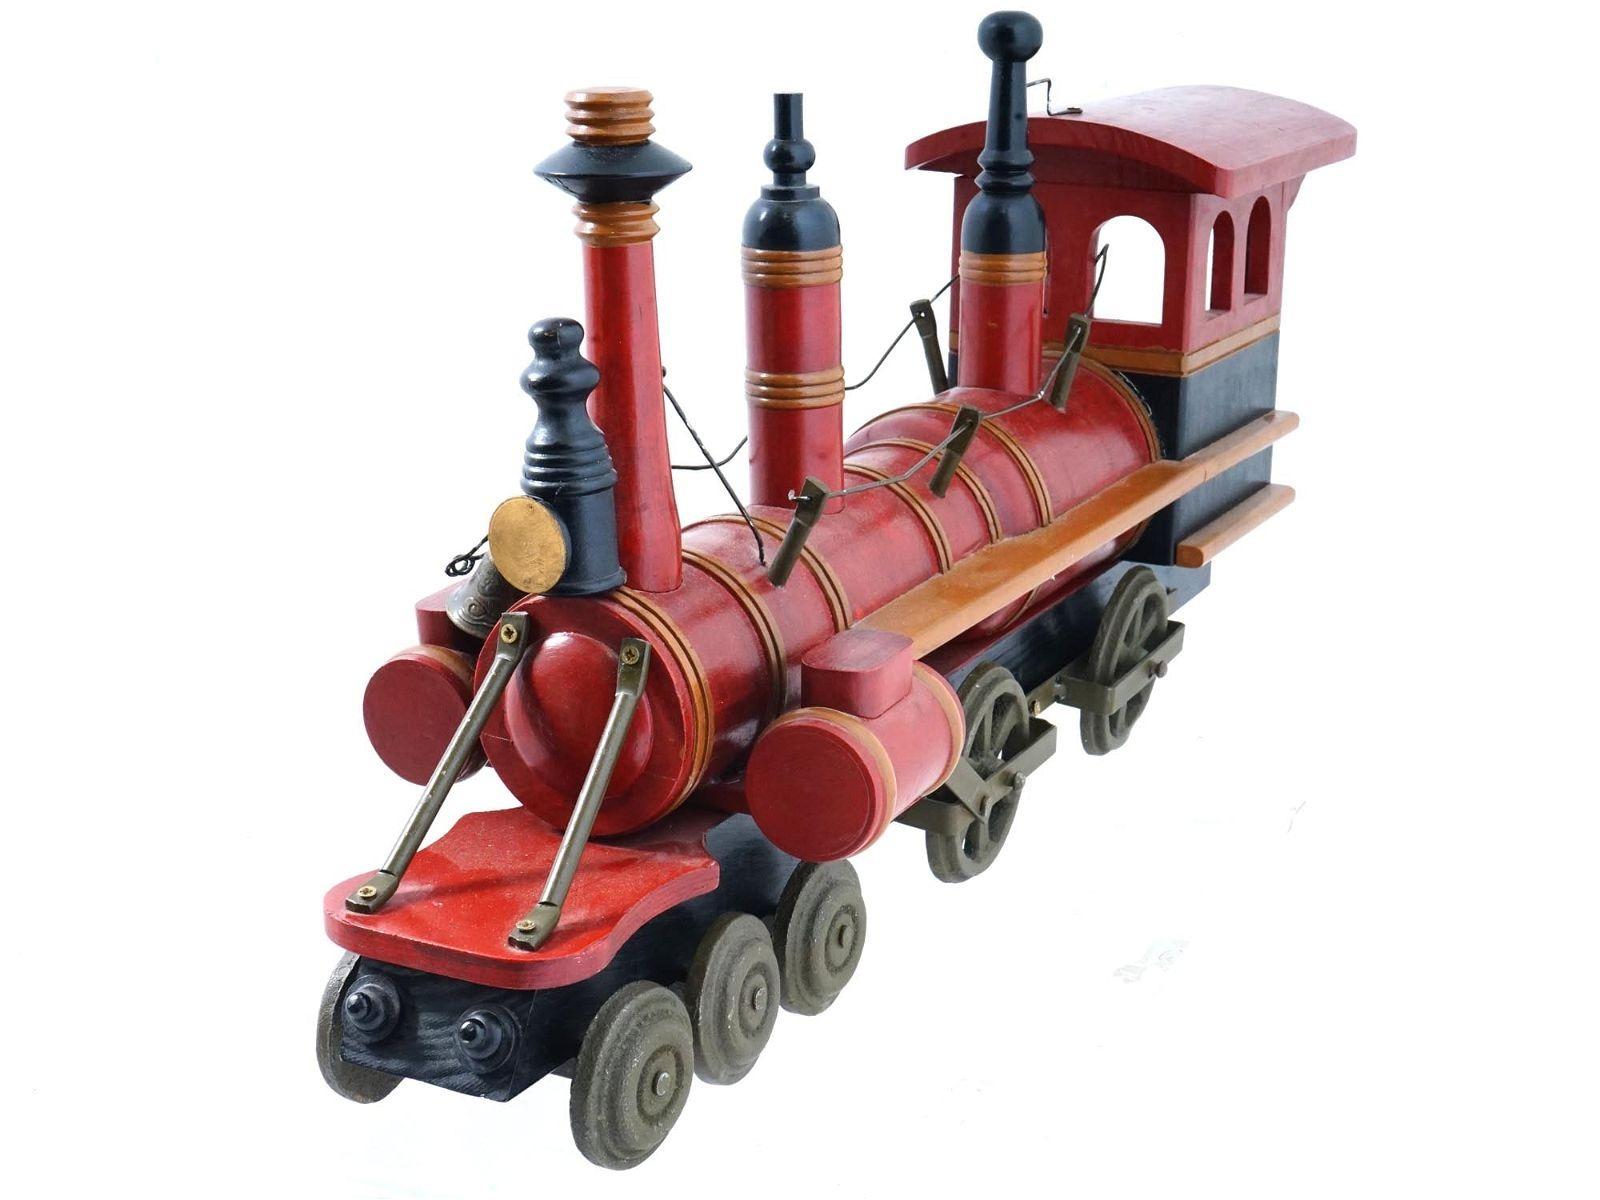 Very large vintage locomotive steam train engine measuring 26 inches long and 11 inches tall.  